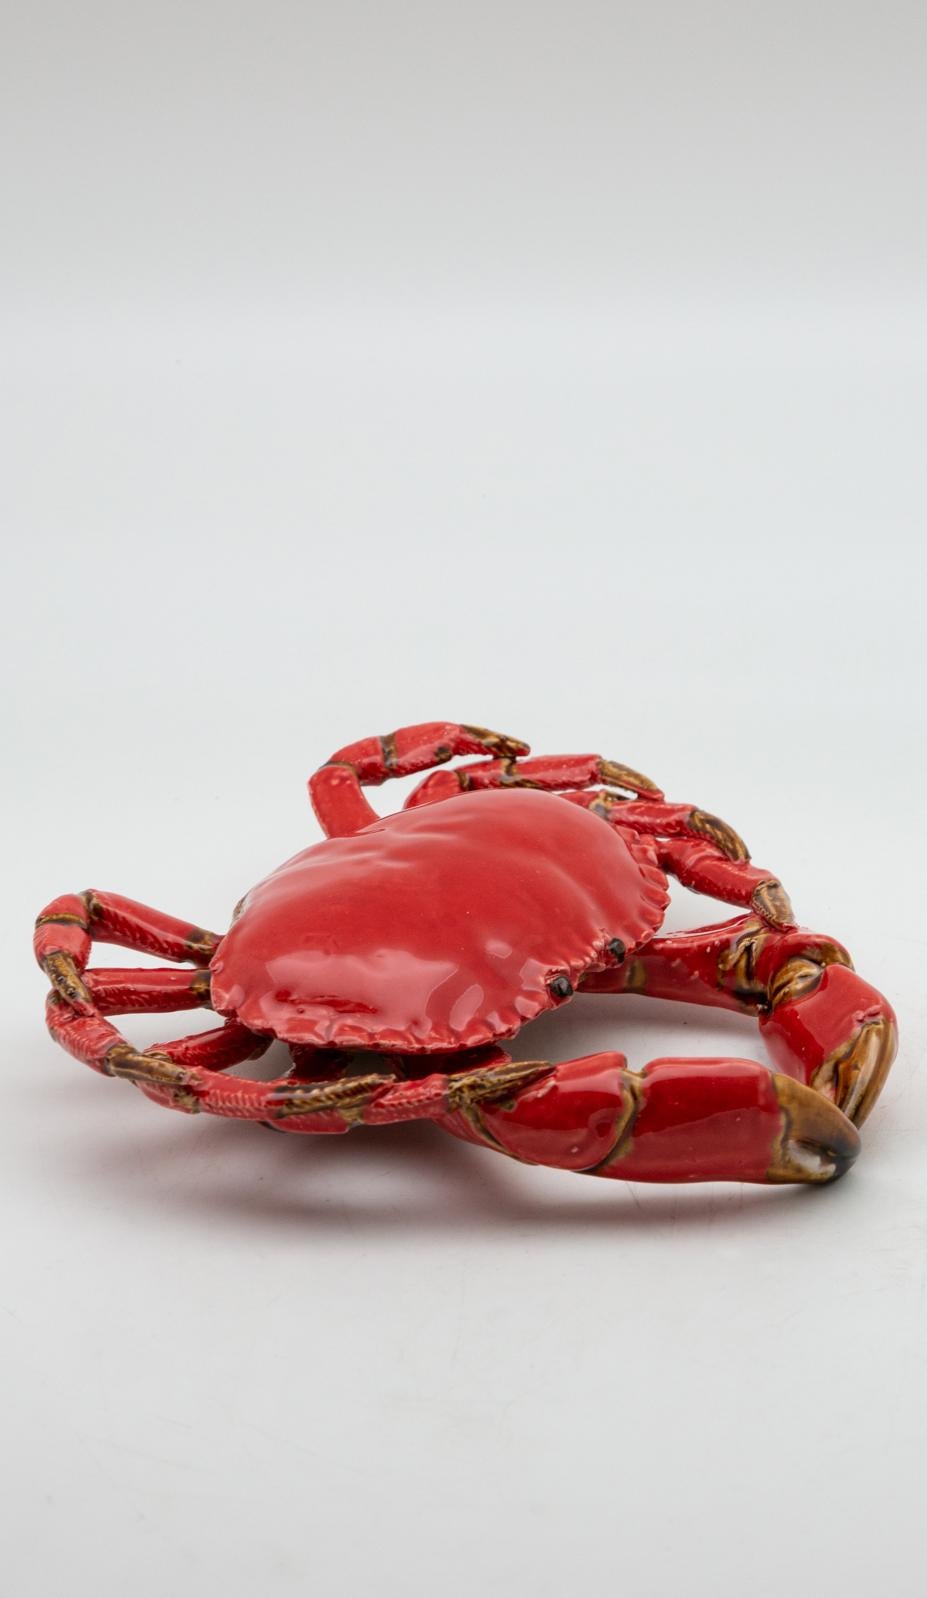 Portuguese Handmade Pallissy or Majollica Red Ceramic Crab. 

Ceramic sea life art has long been a tradition in Portugal.  It was inspired by the 